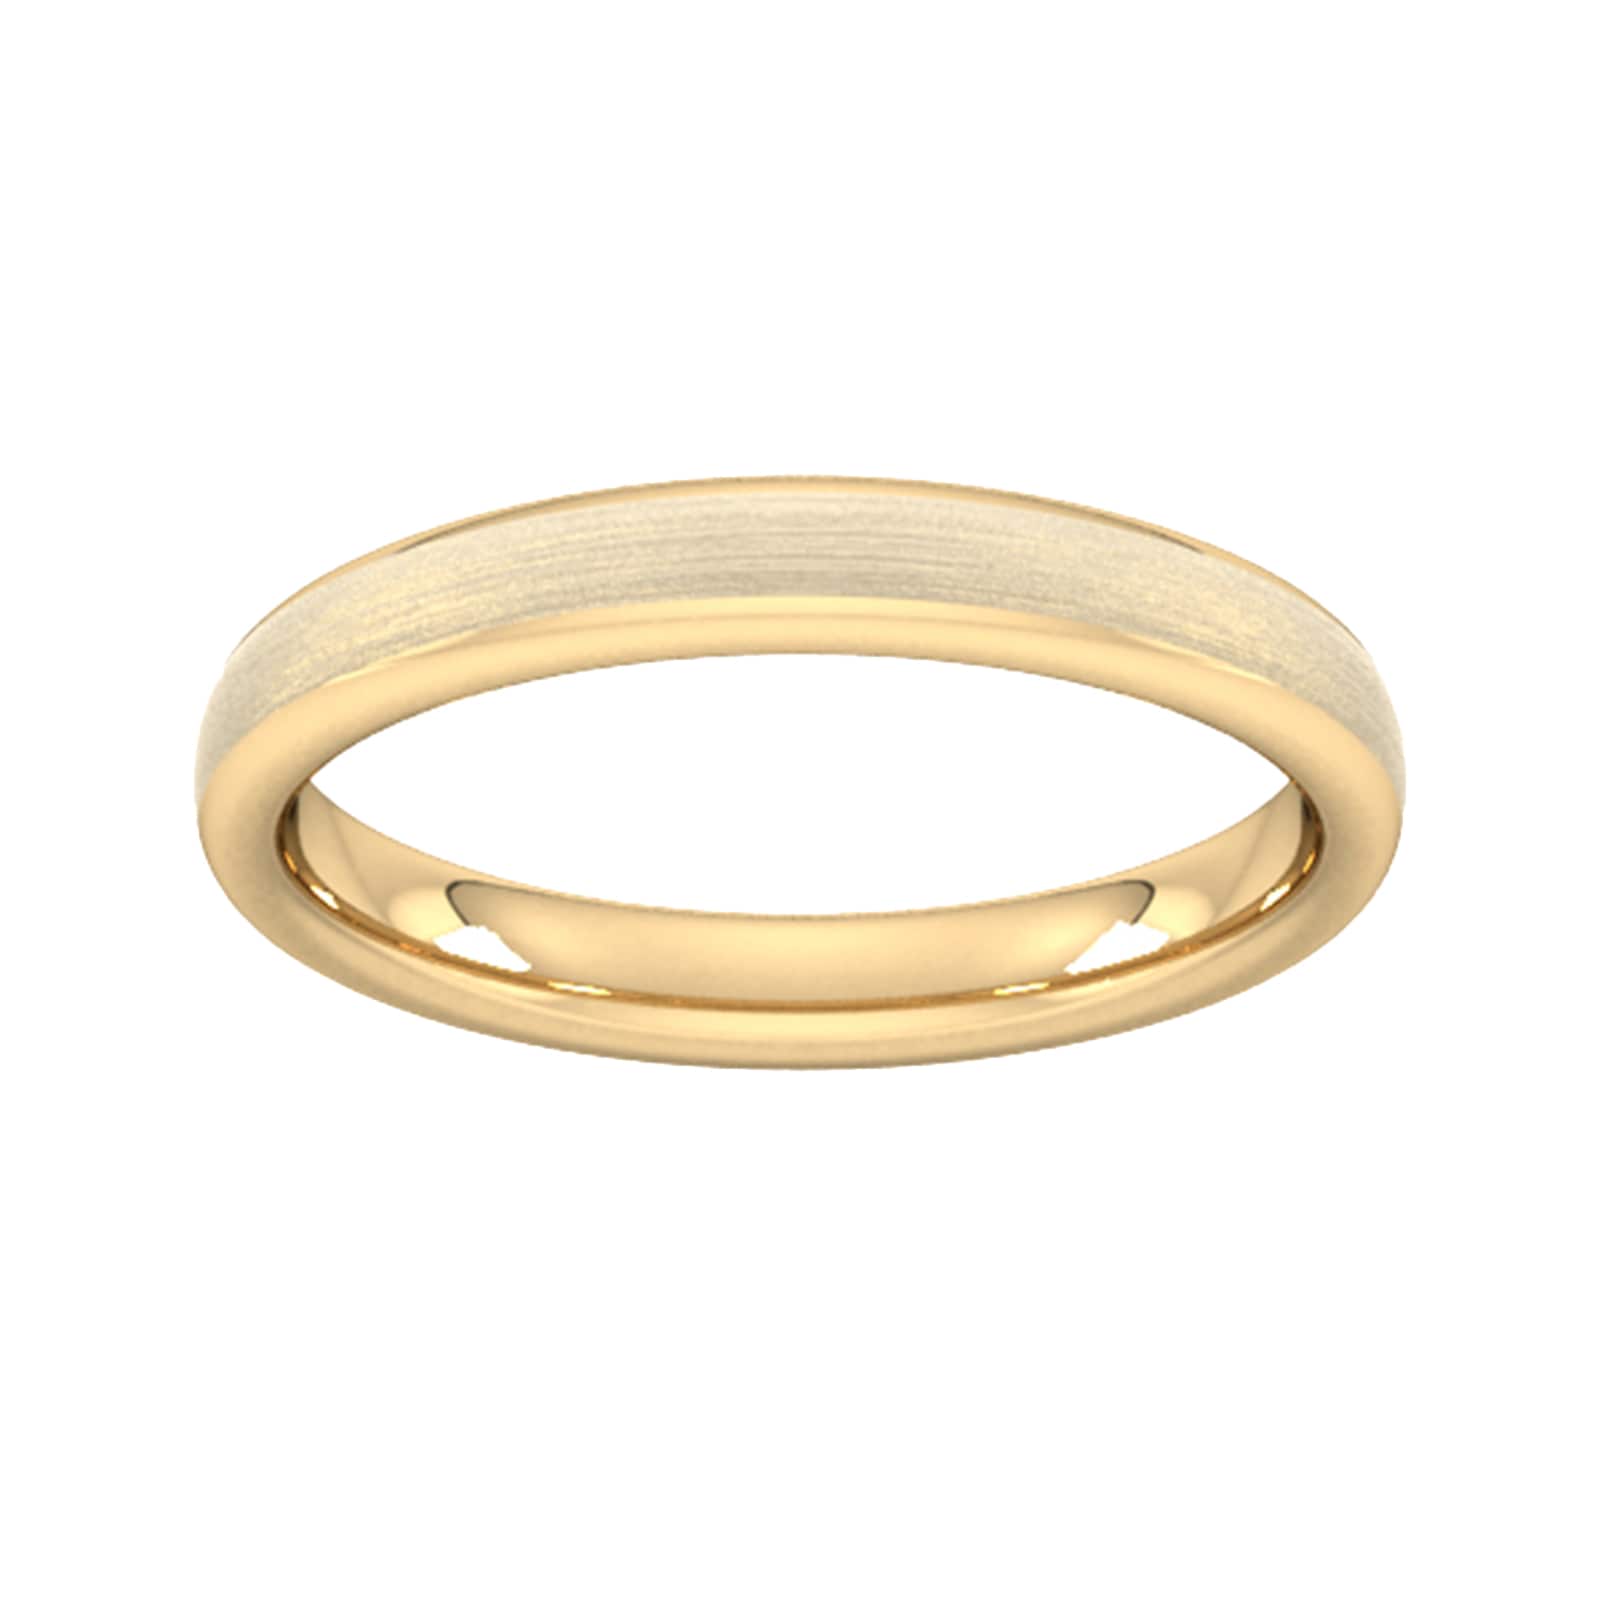 3mm Traditional Court Standard Matt Finished Wedding Ring In 18 Carat Yellow Gold - Ring Size S